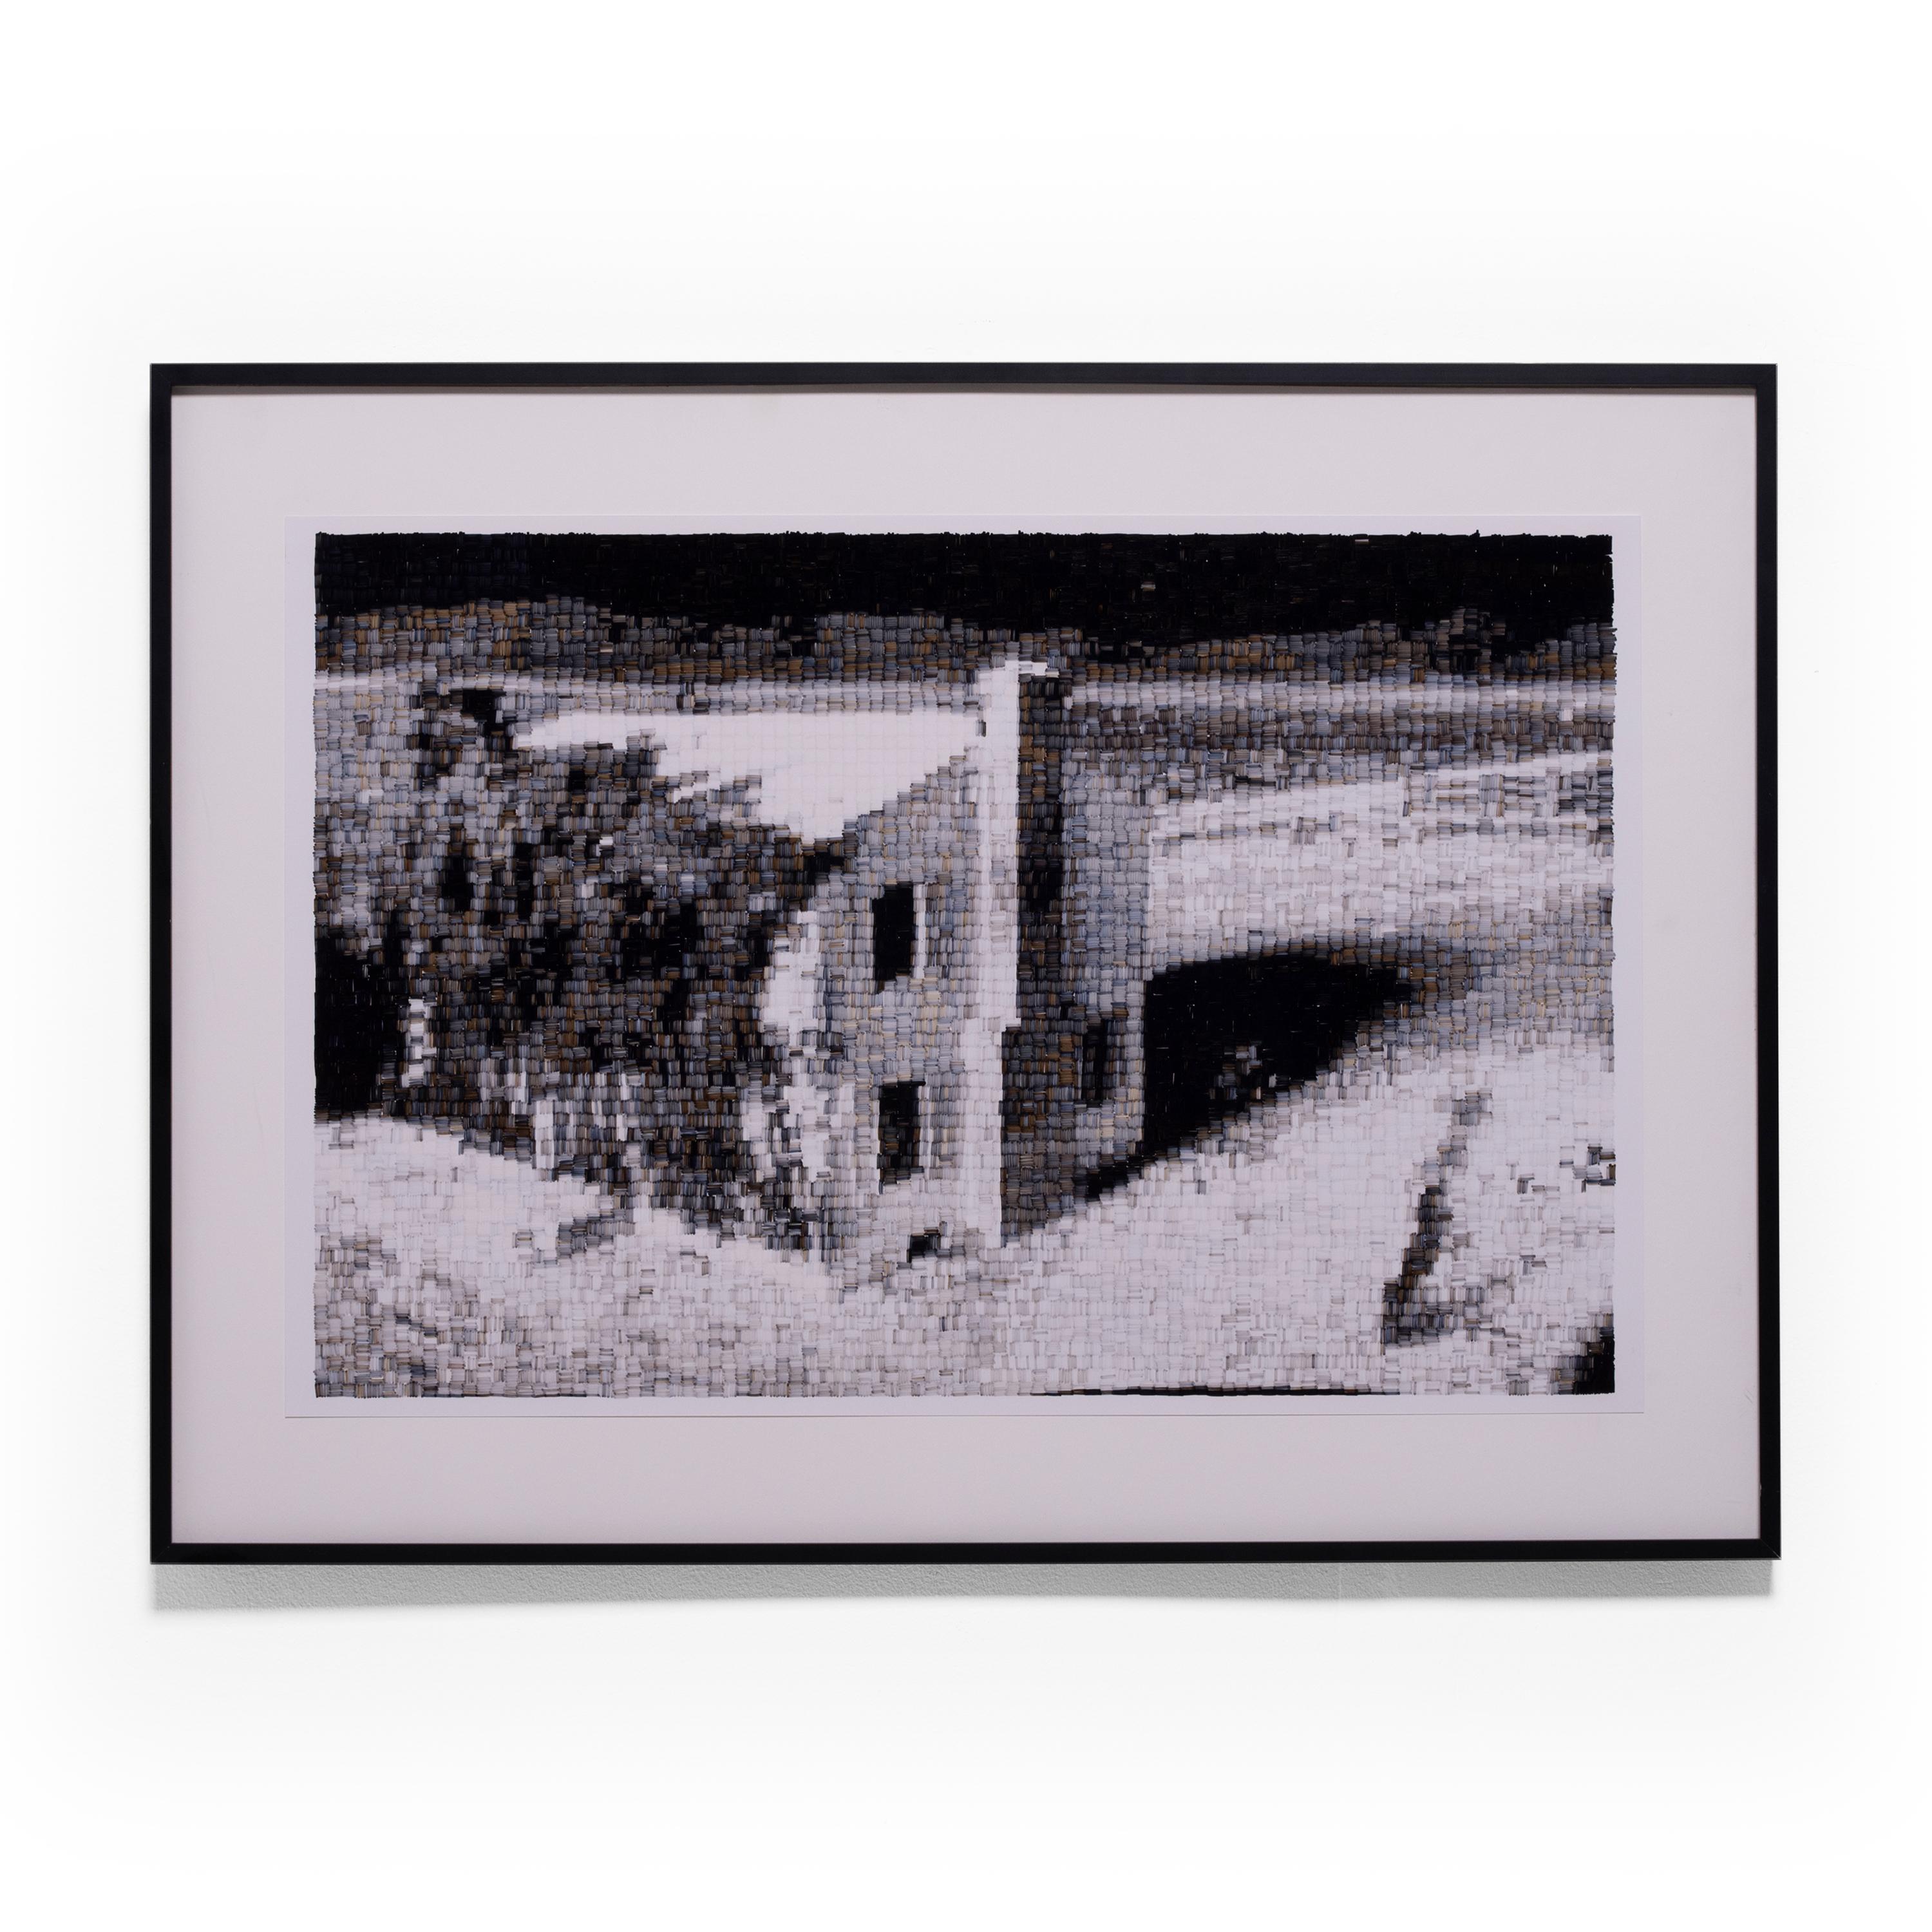 Operation Teapot: Apple 2 occurred in 1955 in Nevada to test the affects of nuclear weapons on small town America.  Here, Jan Pieter Fokkens has taken three photo frames of one home during this testing as a reference.  He then pixelates each image